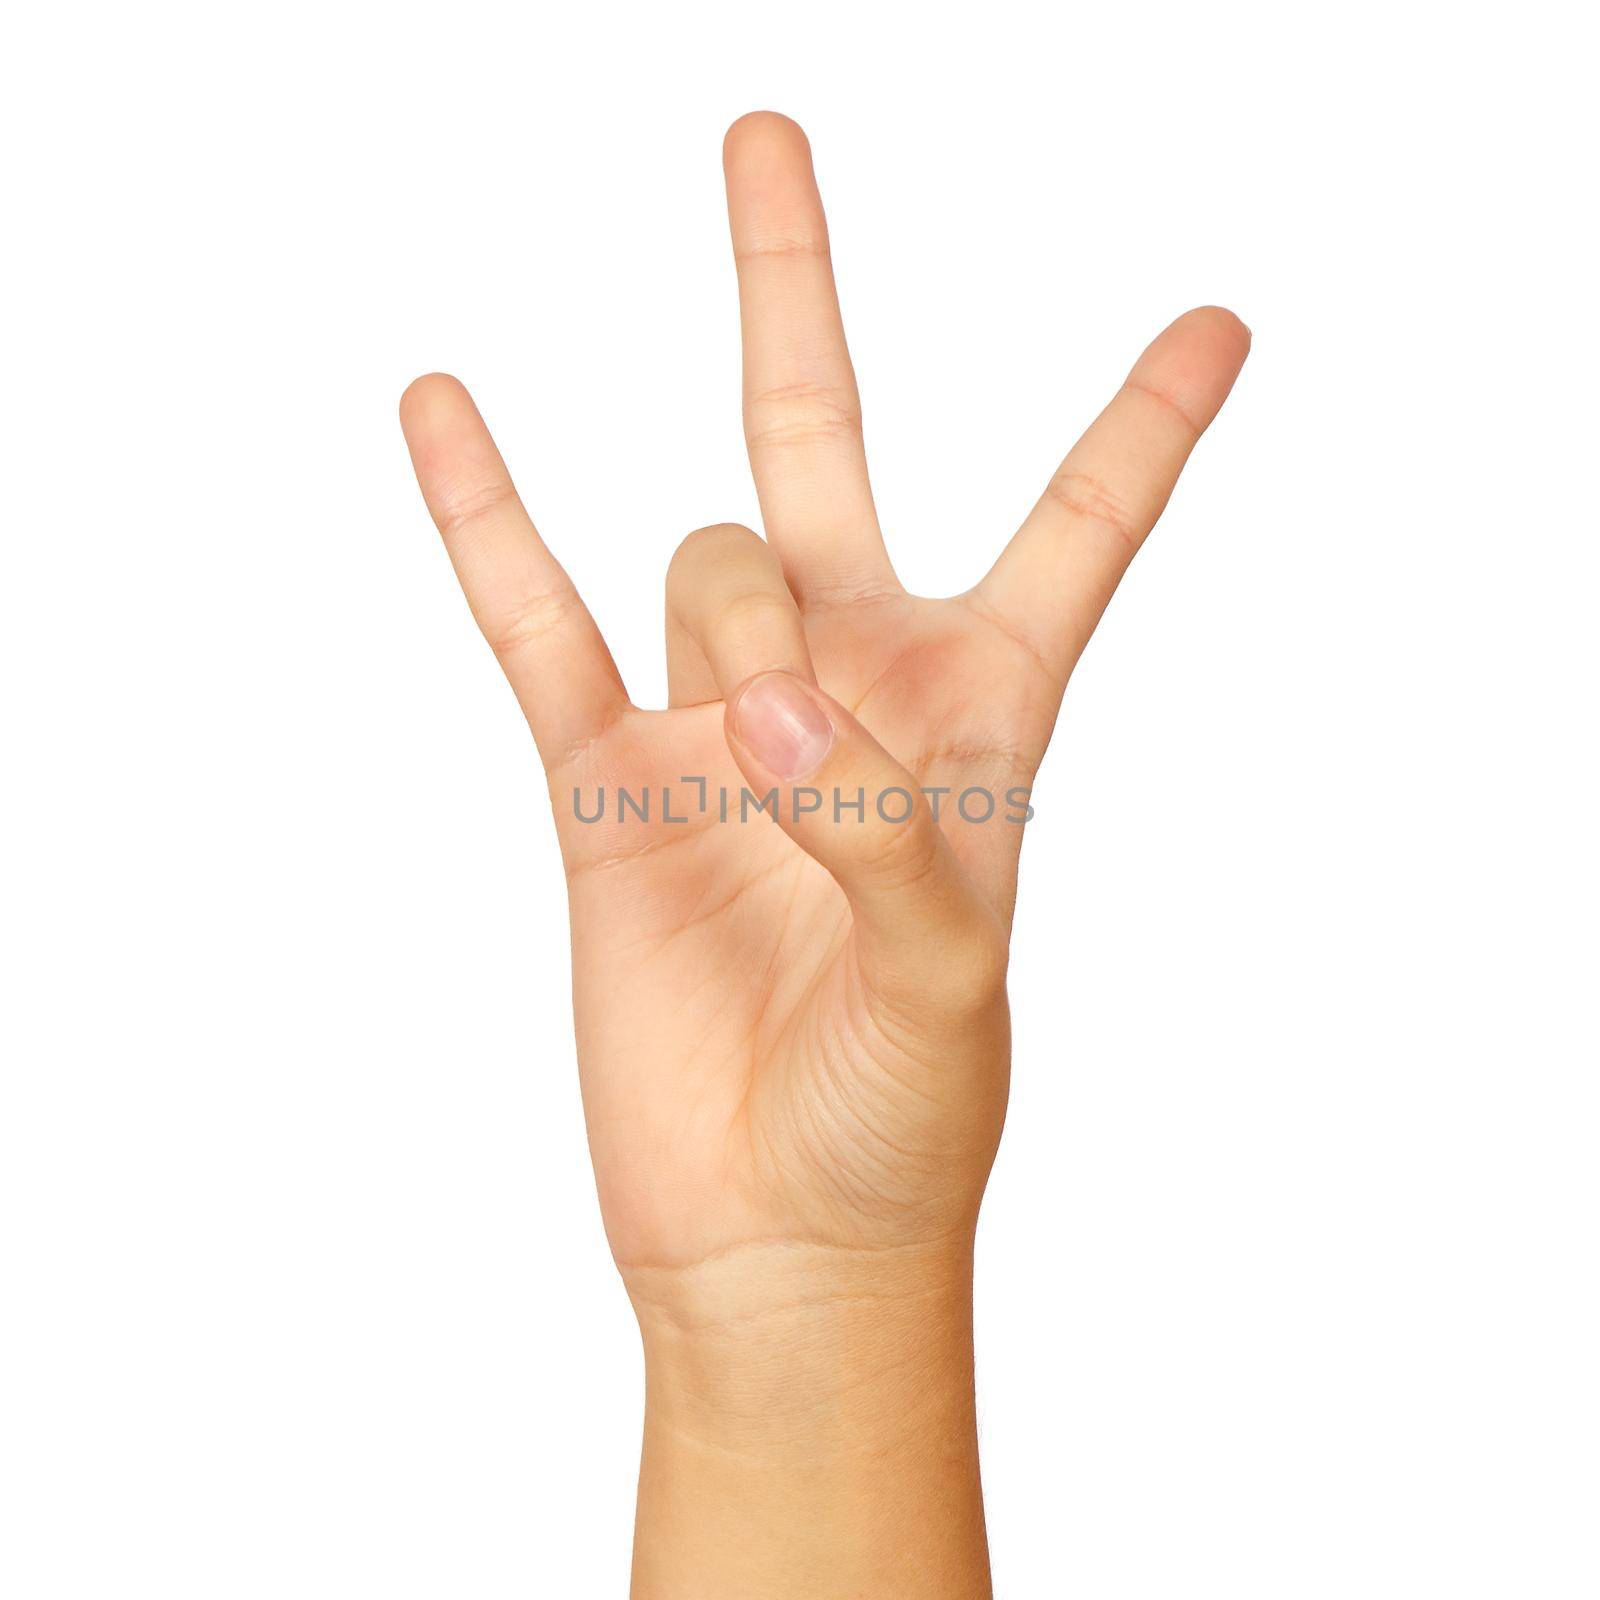 american sign language number 7. female hand gesturing isolated on white background